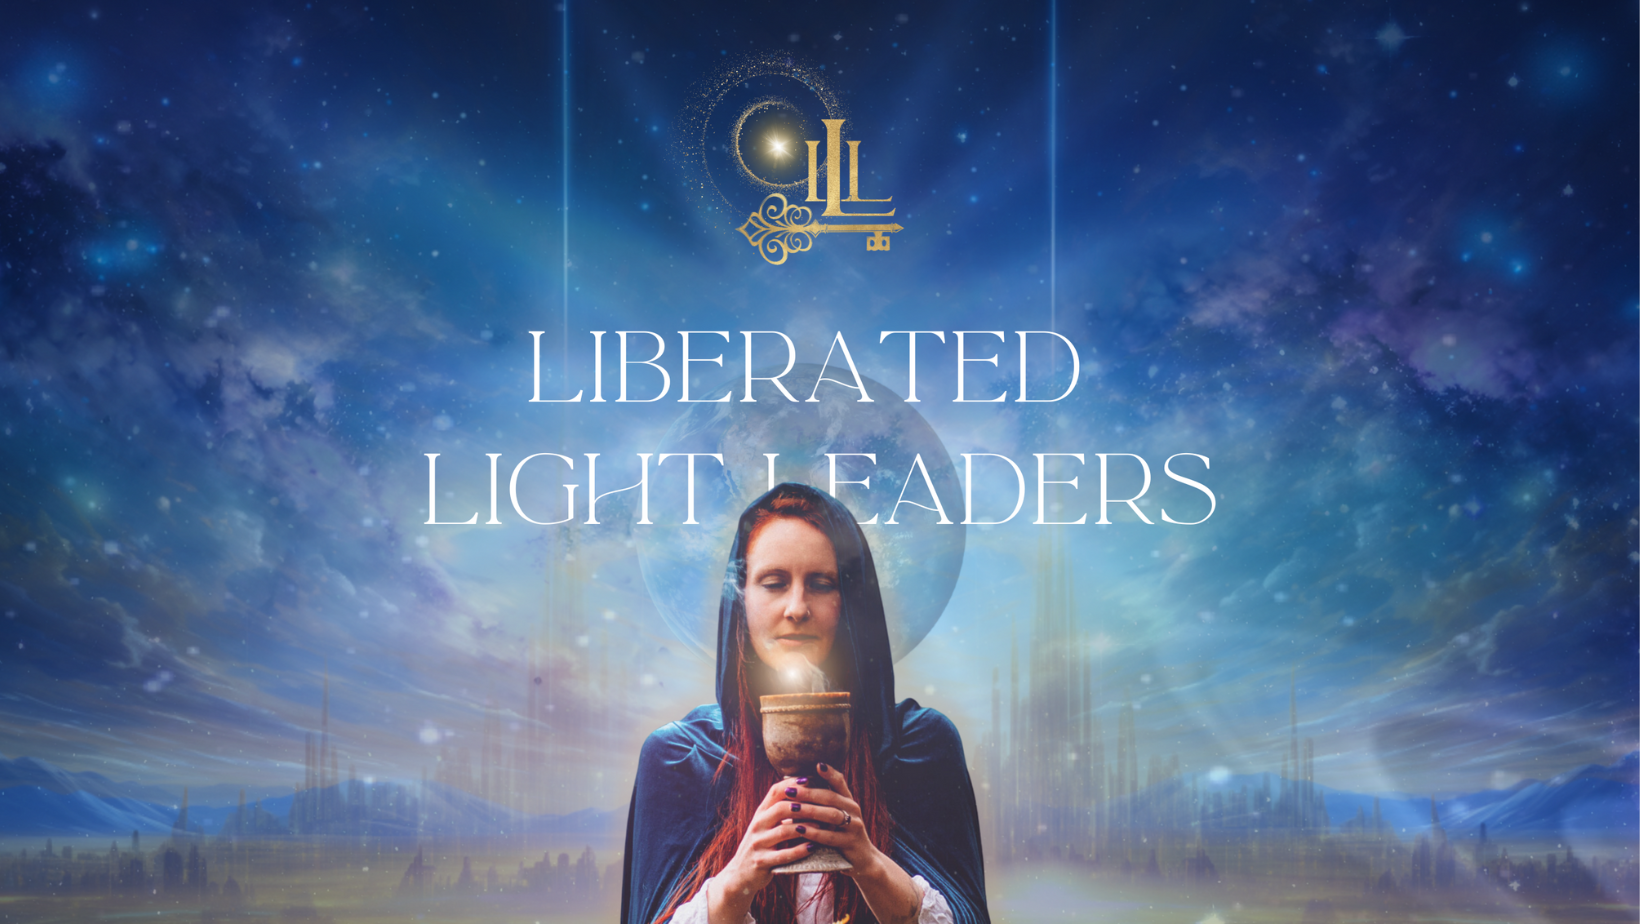 The Guiding Light of Your Higher Calling - A Vision-Led Life Podcast Episode 1